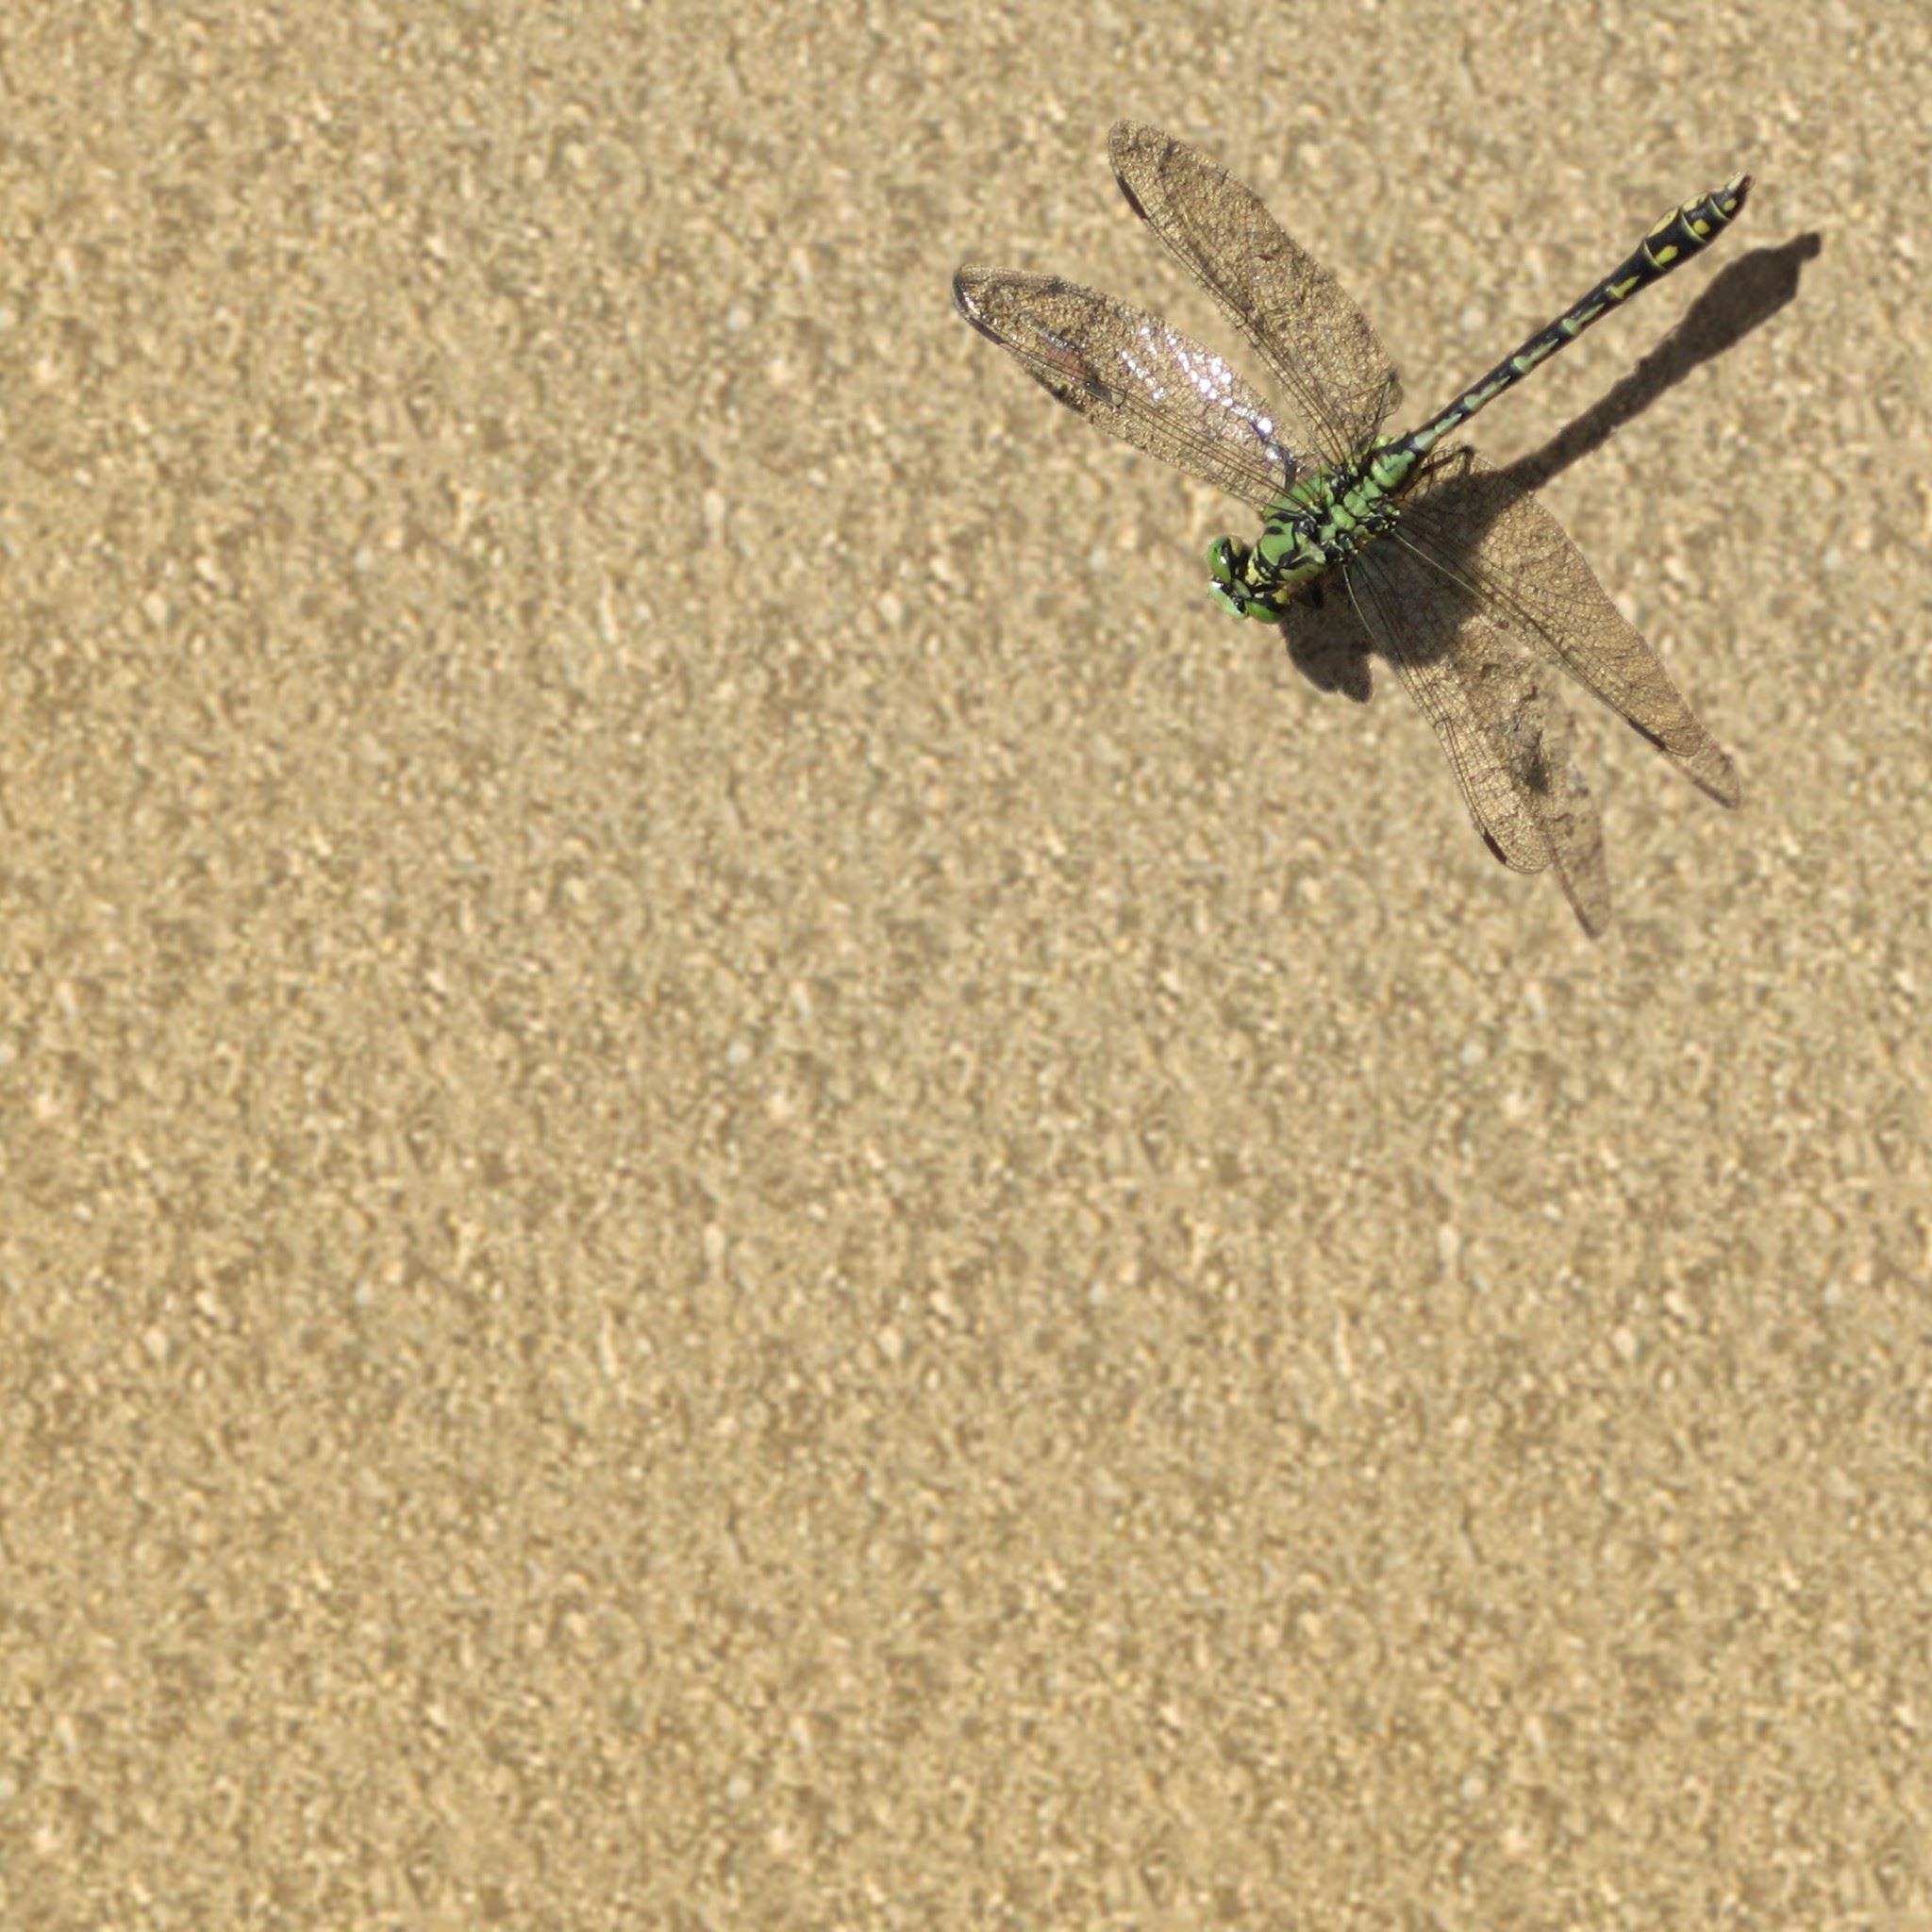 Dragonfly Insects Nature iPad Air wallpaper 